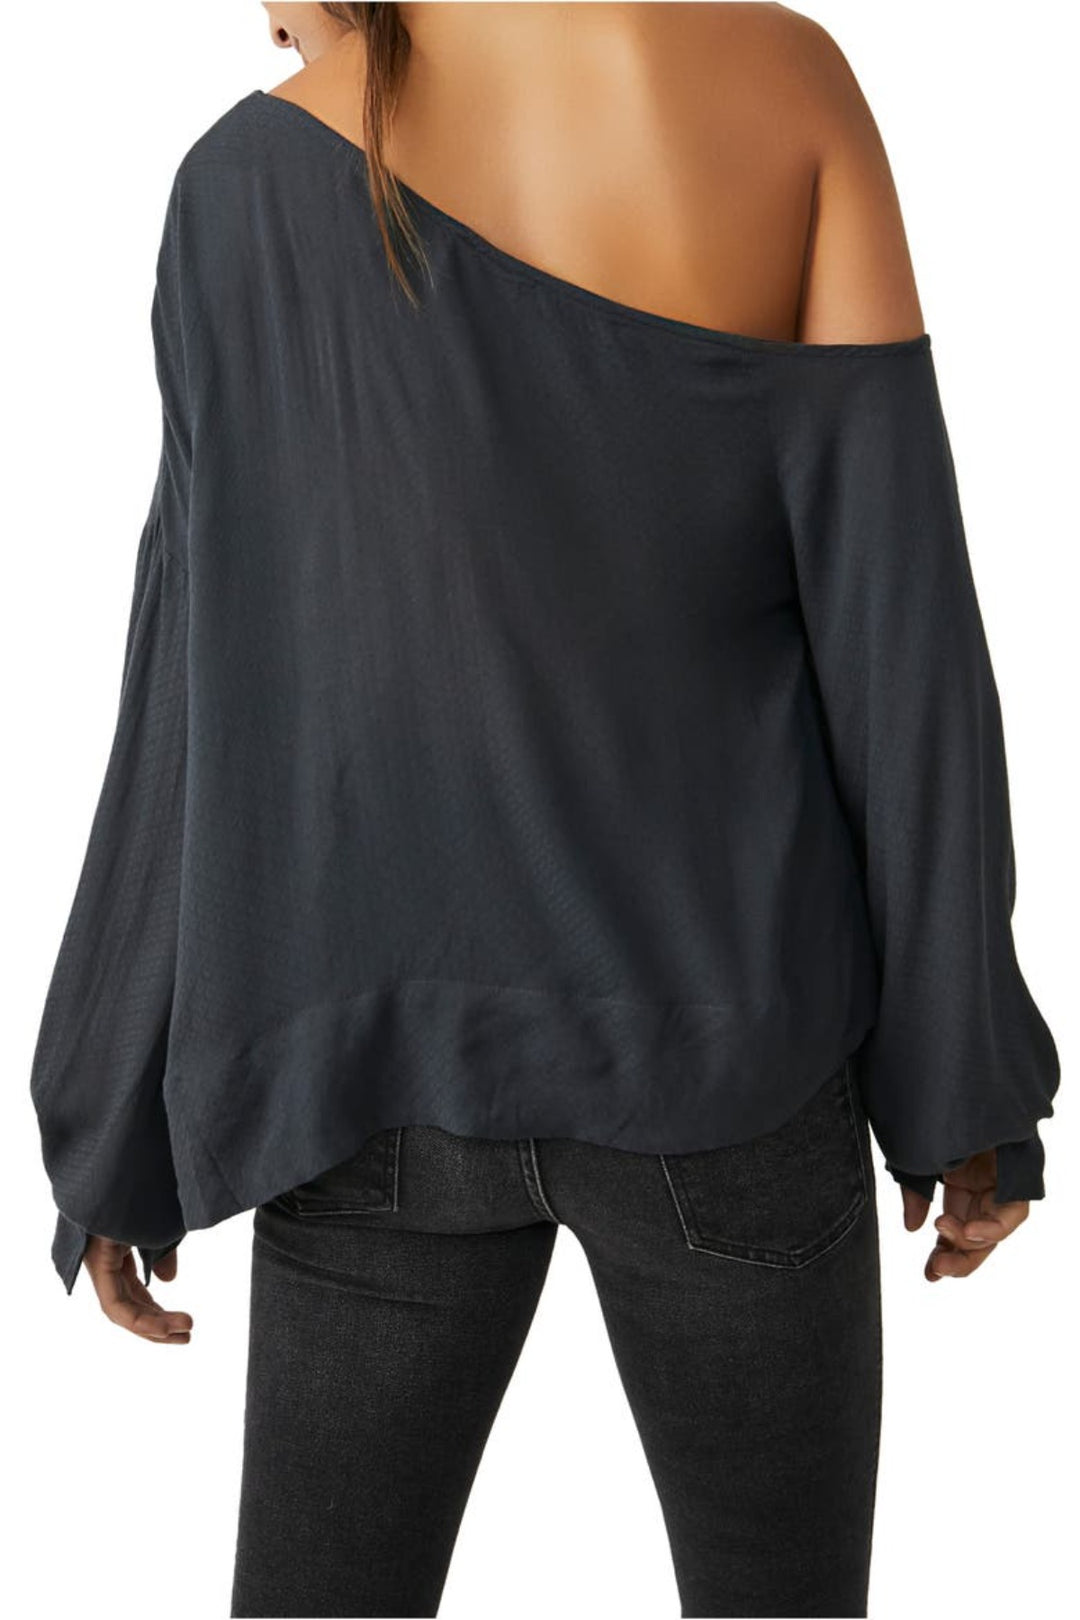 FREE PEOPLE - JUSTINA BLOUSE #color_metalstiletto carlsbad shops. carlsbad boutiques.